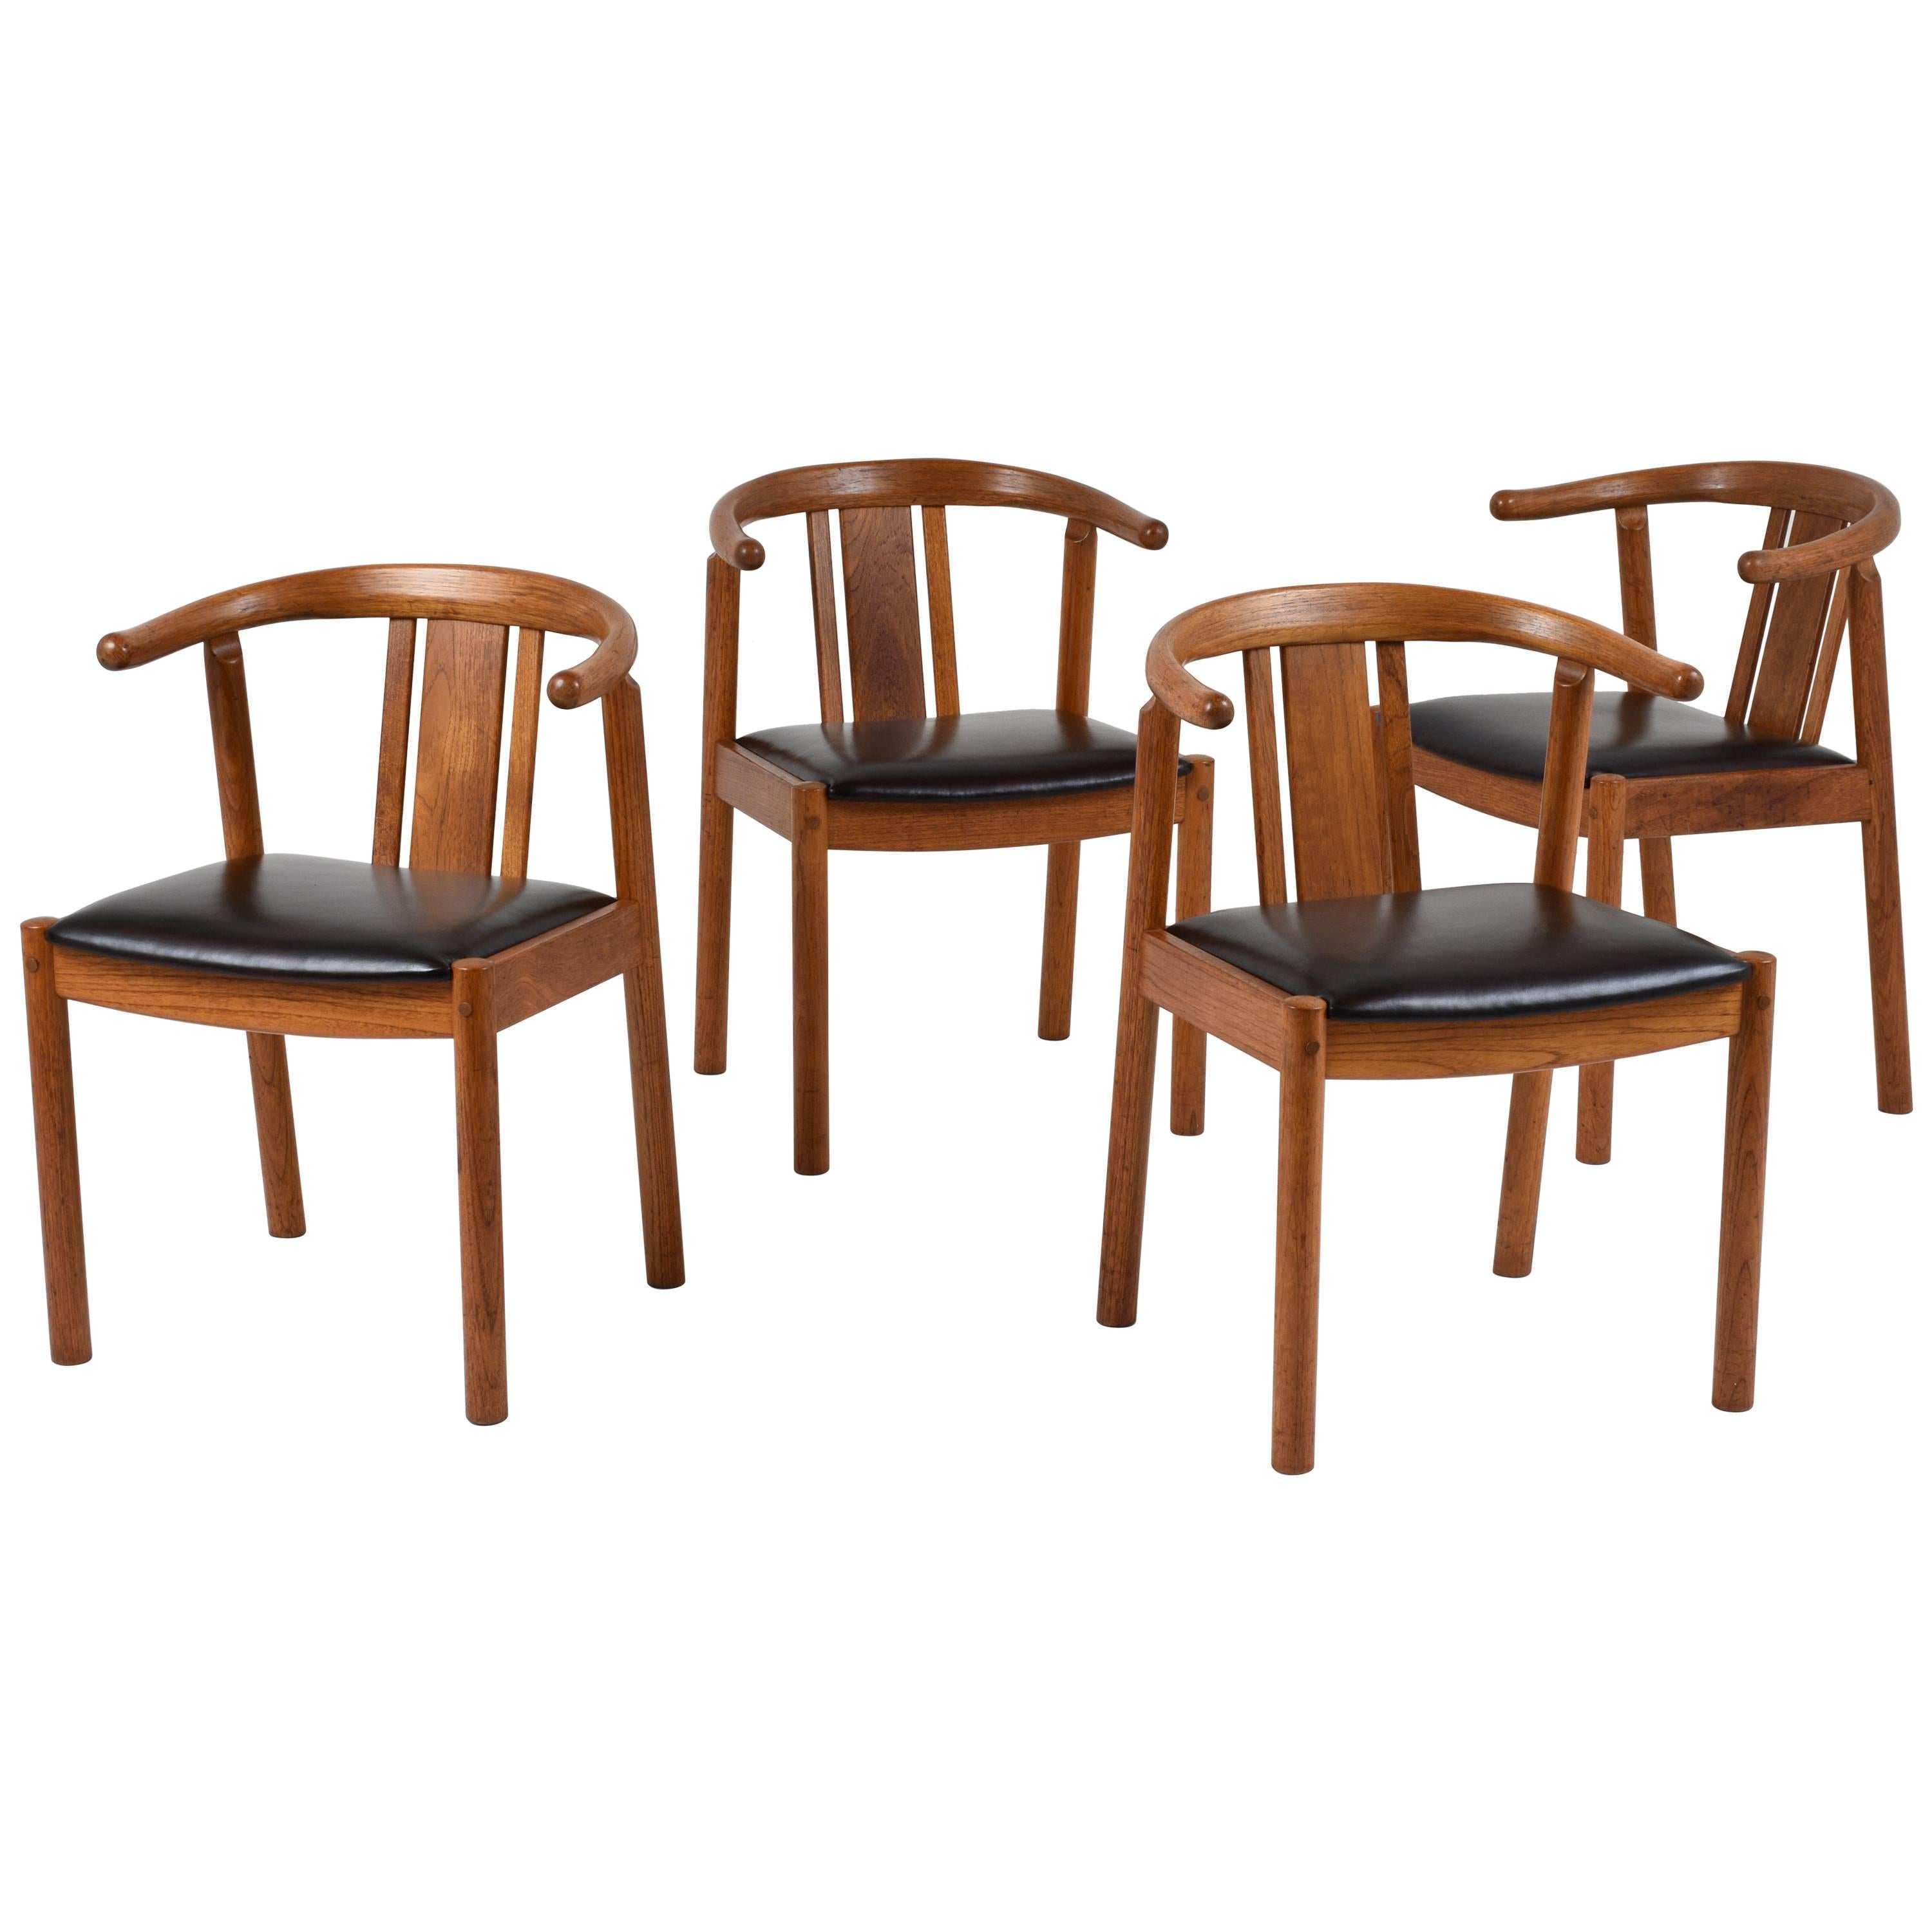 Set of Four Danish Mid-Century Modern-Style Dining Chairs